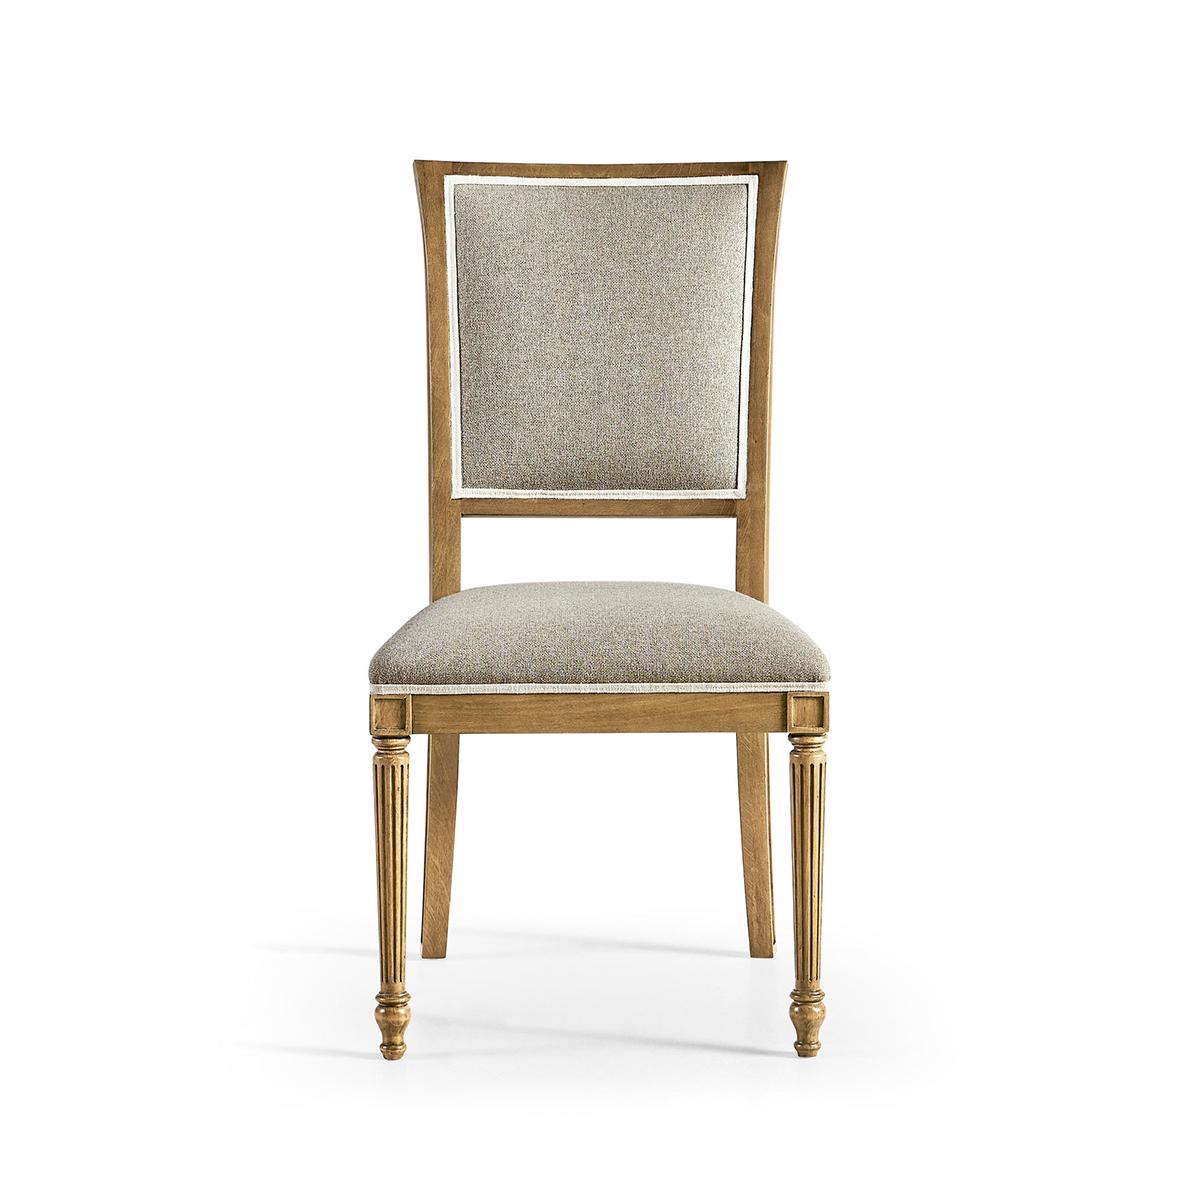 Crafted with meticulous attention to detail, this chair features a sophisticated sunbleached Cherry wood finish and graceful front turned, tapered and fluted legs, adding a touch of European flair to any dining room. 

The hand-upholstered plush,